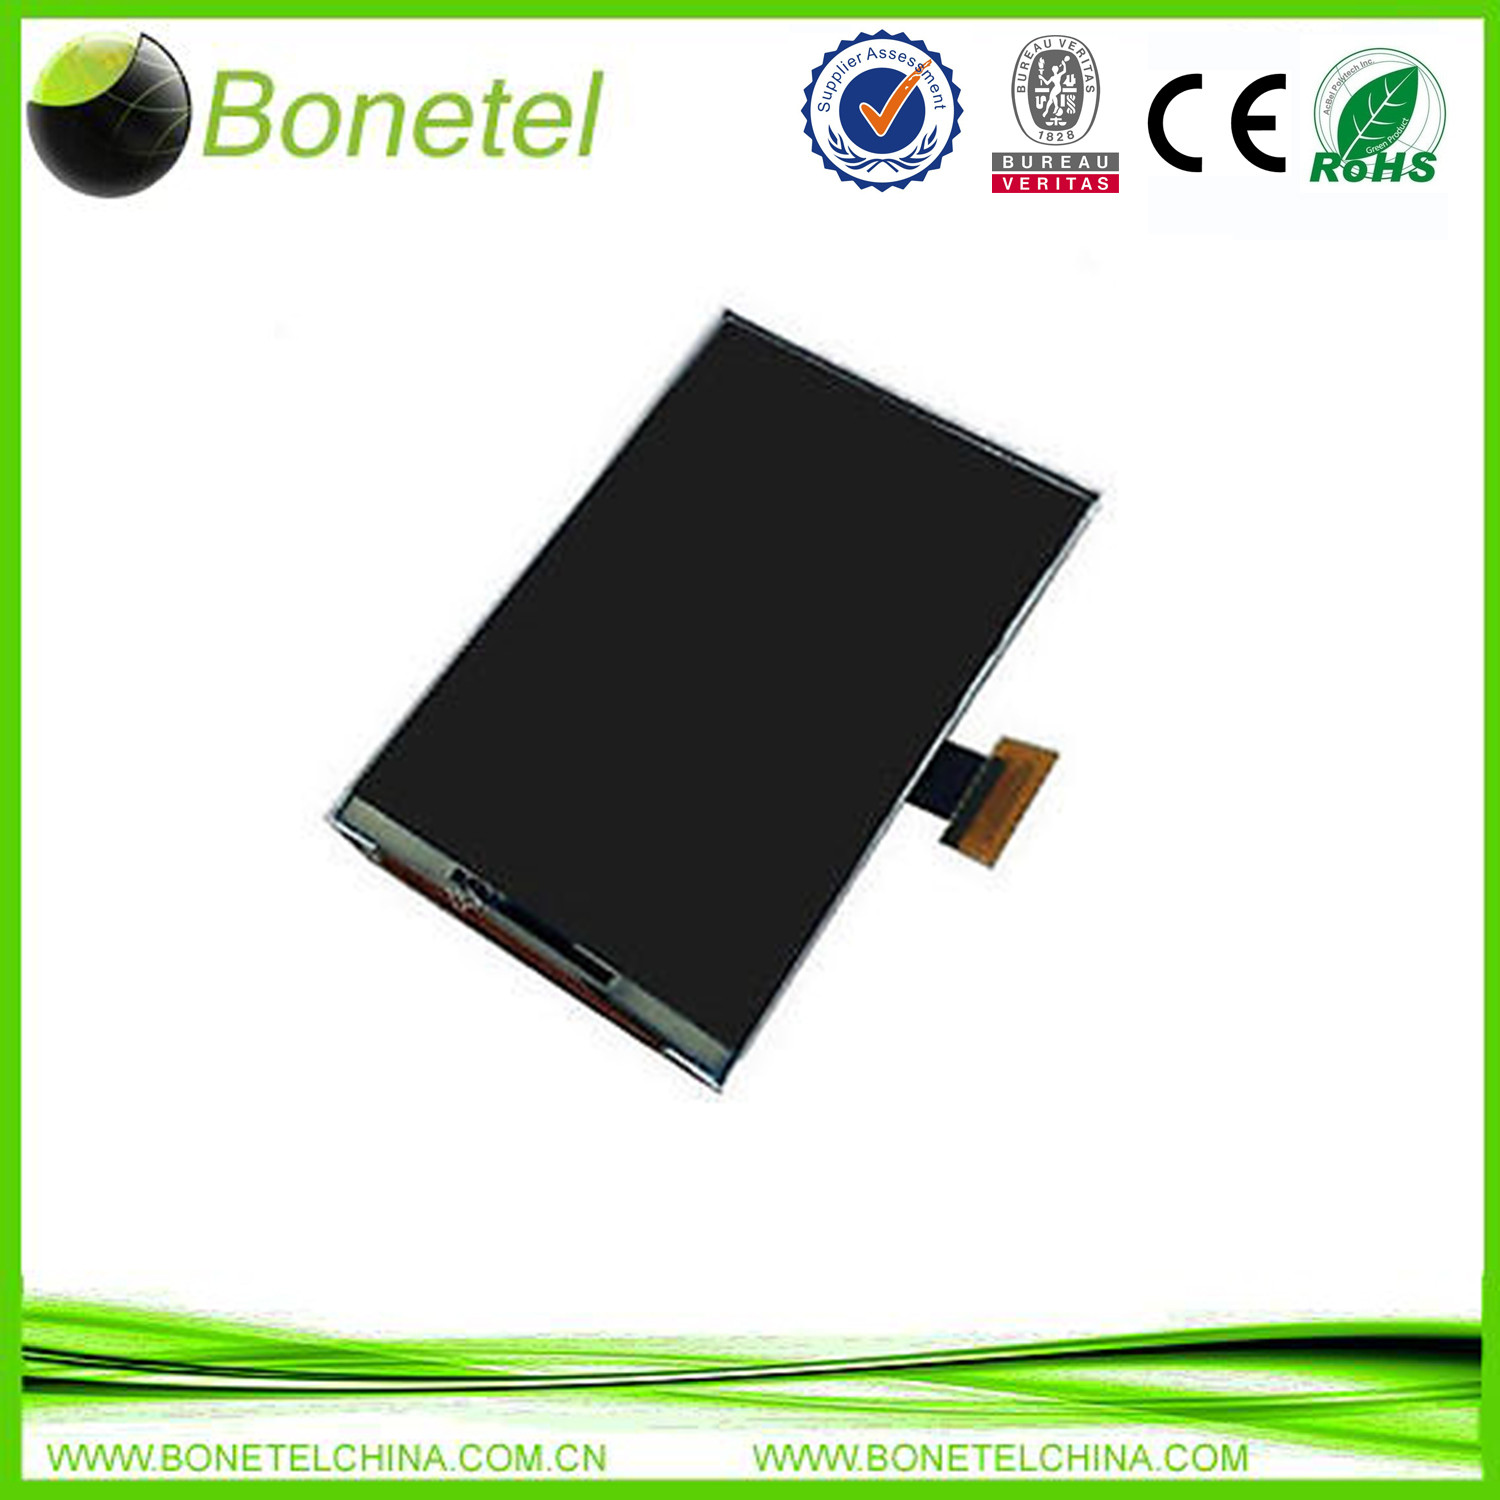 NEW Replacement LCD Screen Display Repair Part For SAMSUNG i7500 GALAXY GT-i7500